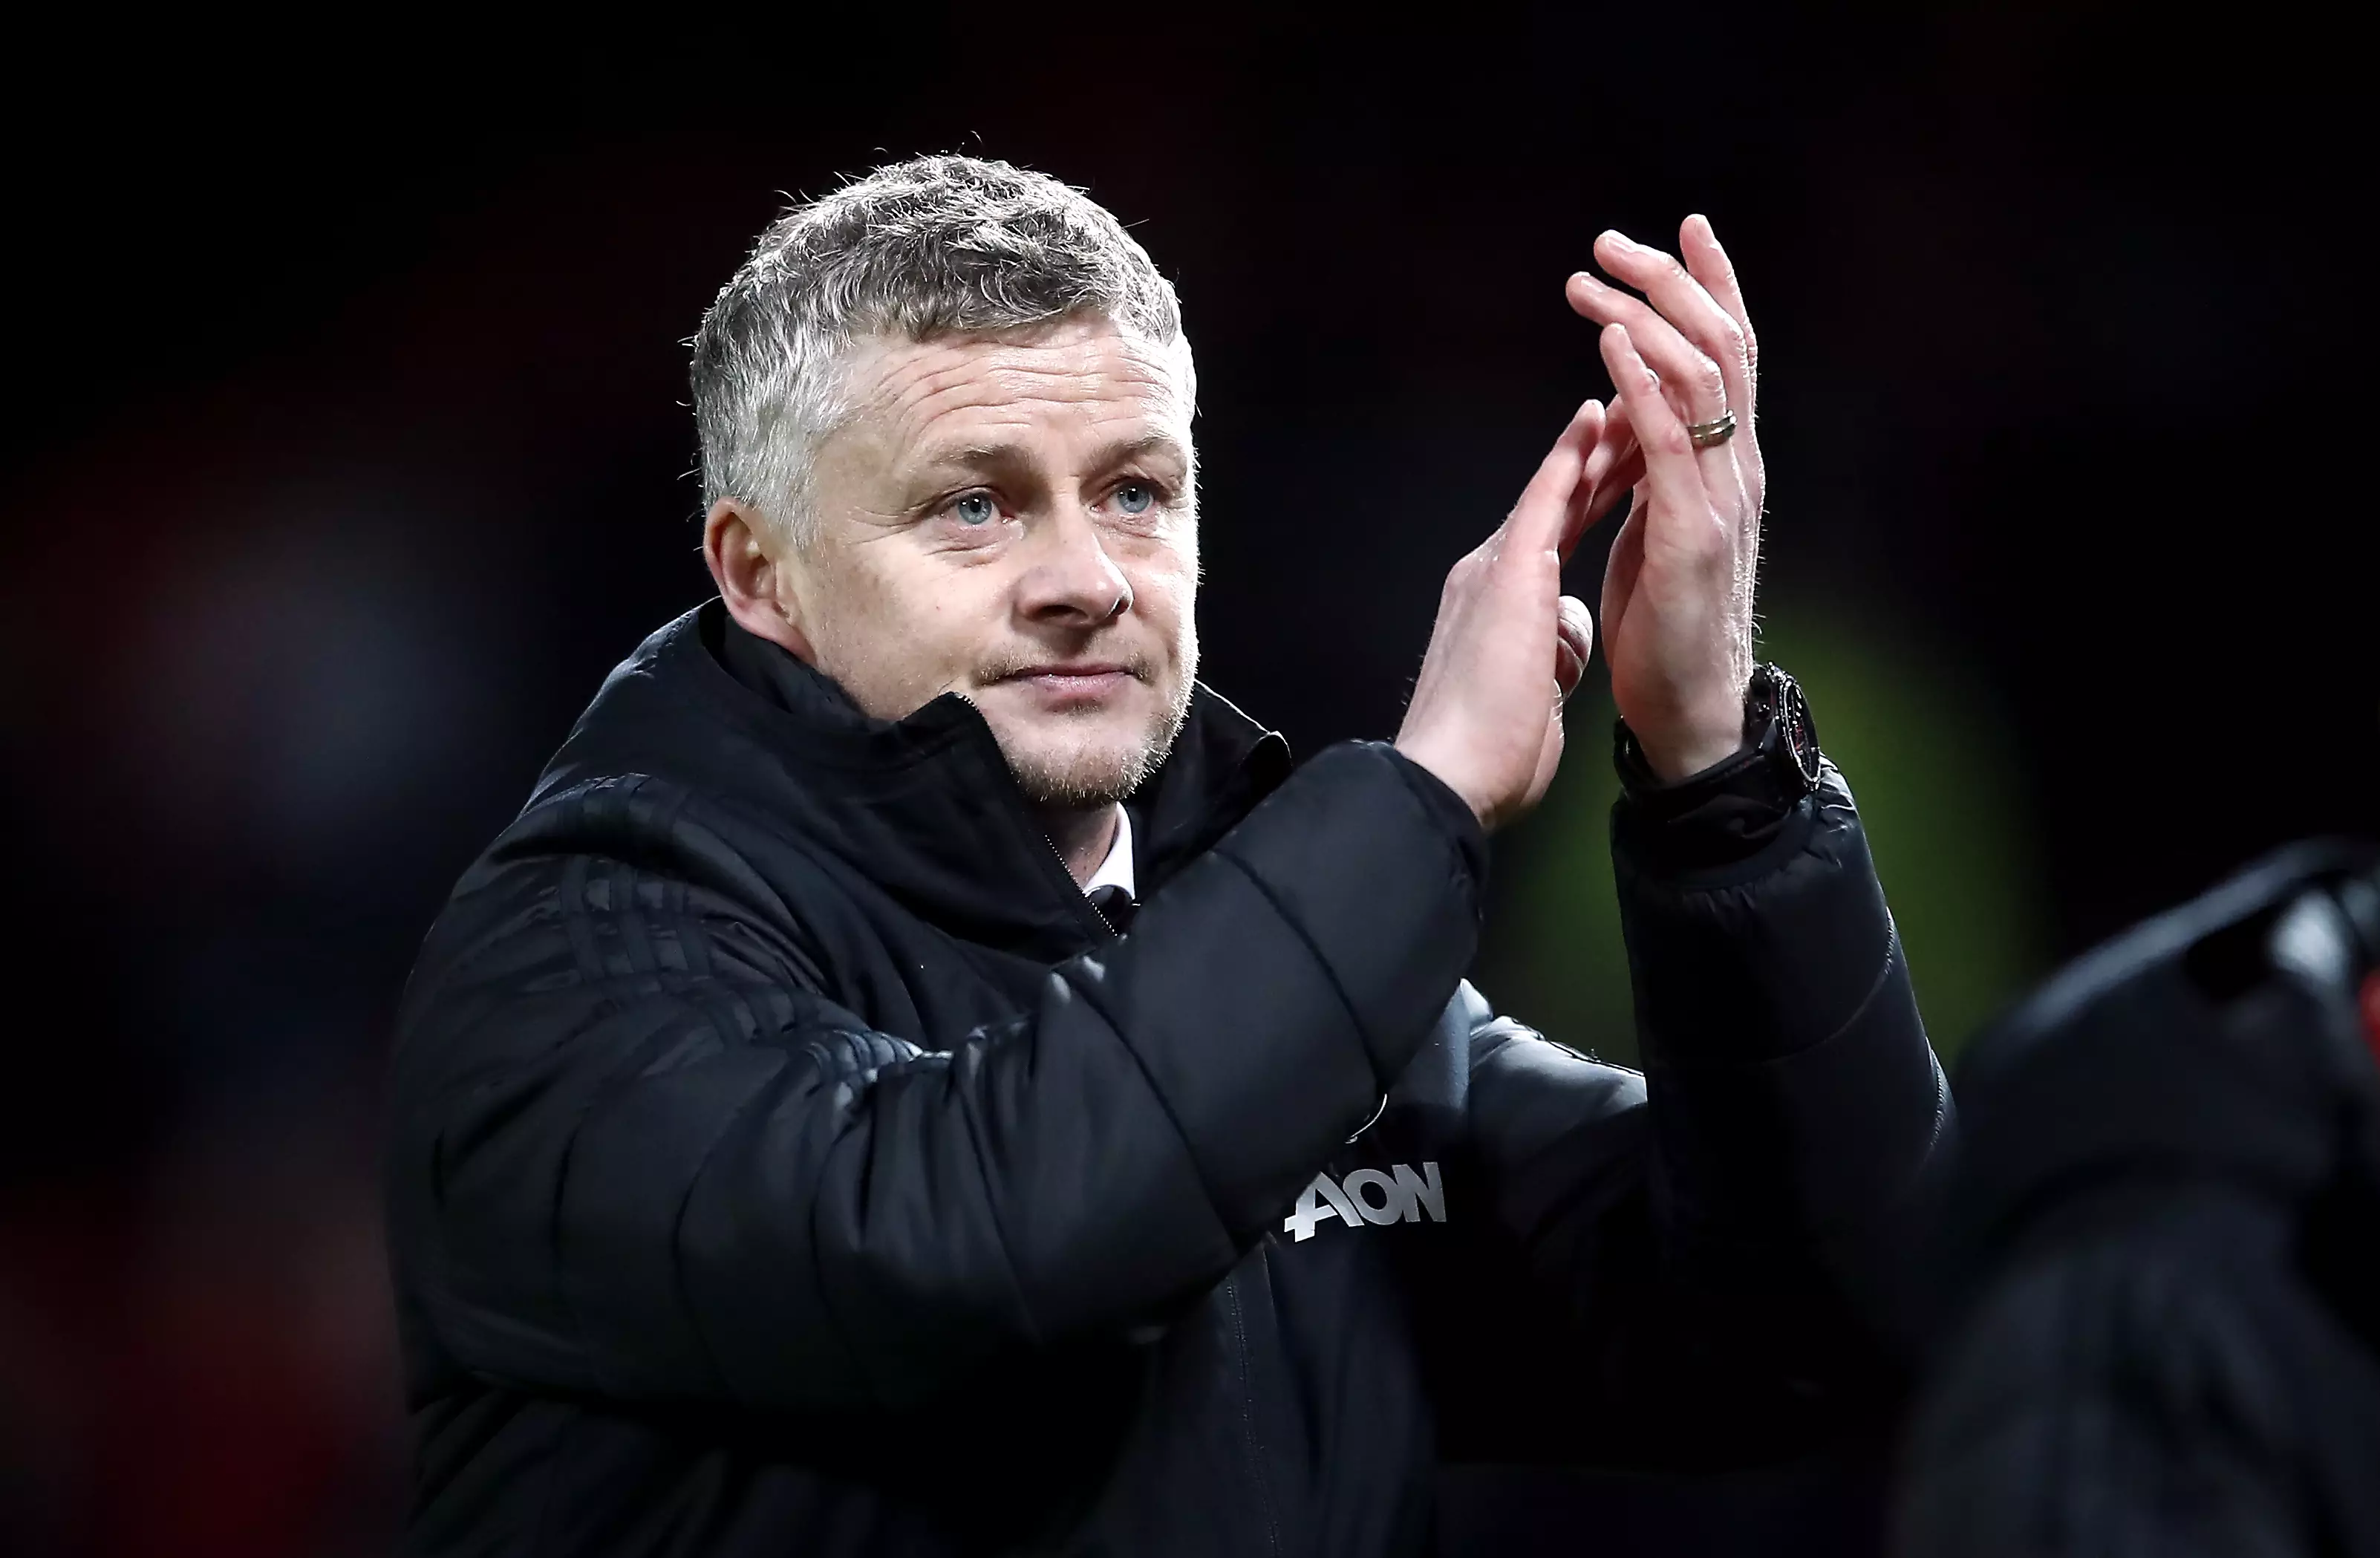 Solskjaer applauds the fans after the draw with Wolves. Image: PA Images